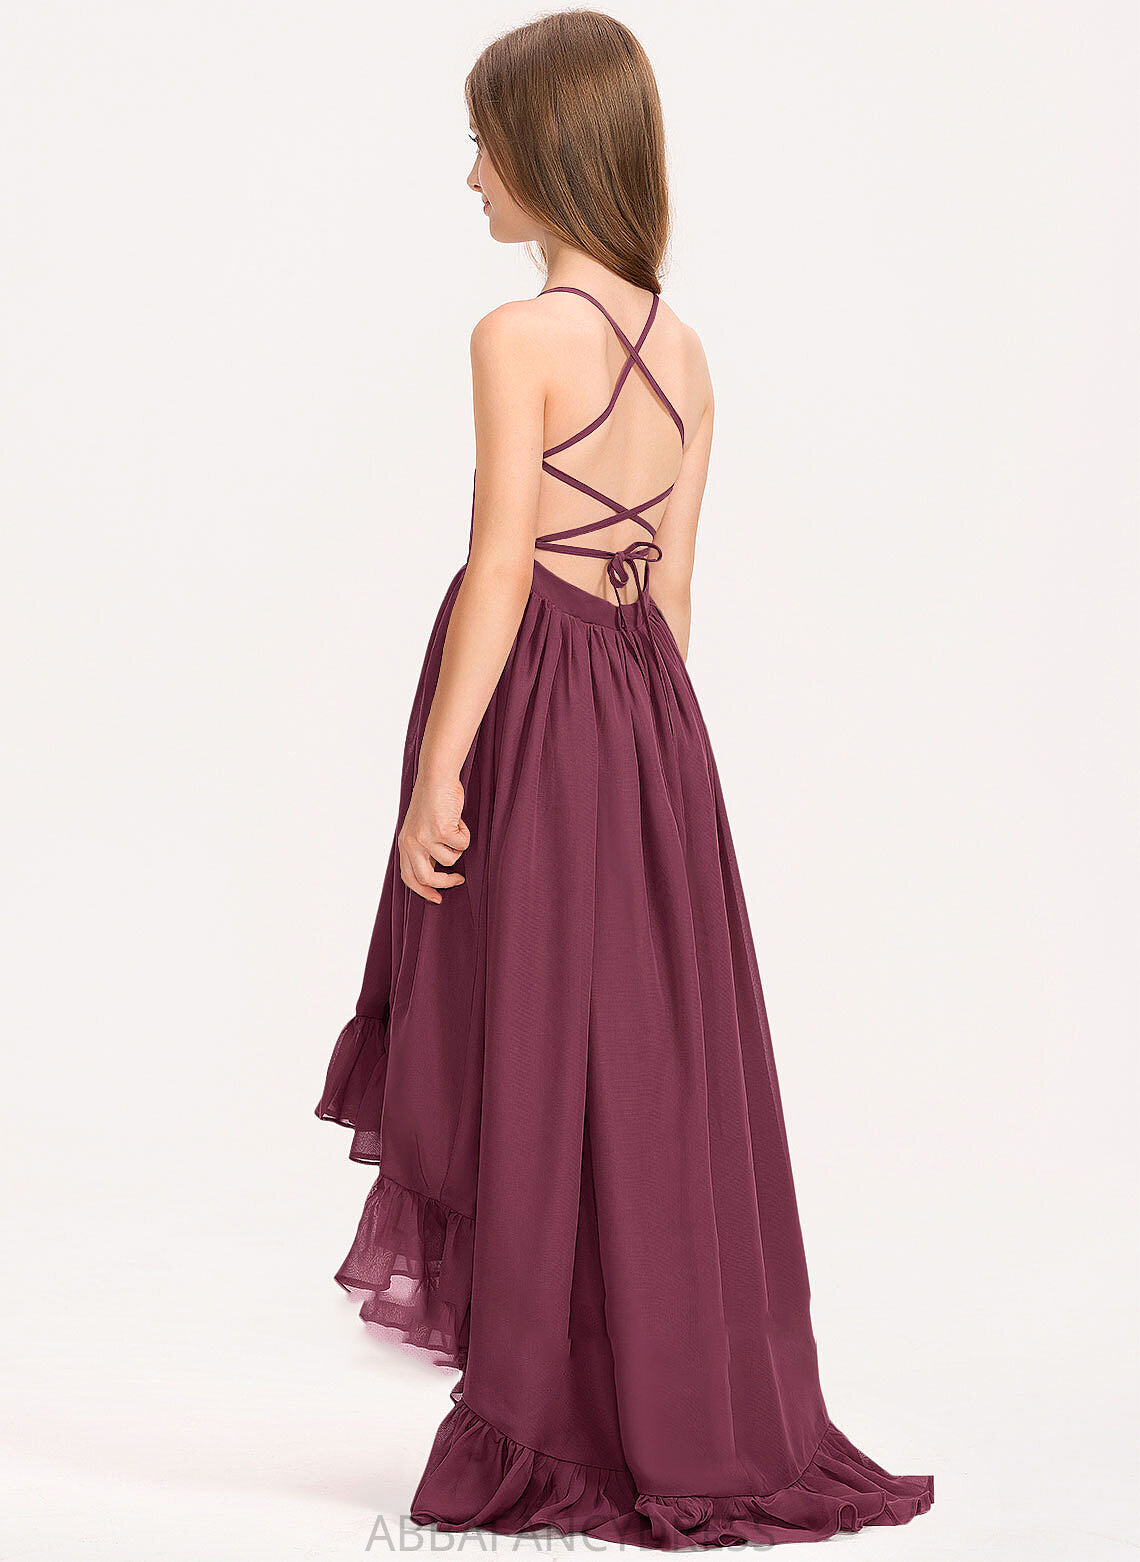 Bethany Junior Bridesmaid Dresses A-Line Bow(s) Scoop Neck With Ruffles Cascading Asymmetrical Chiffon